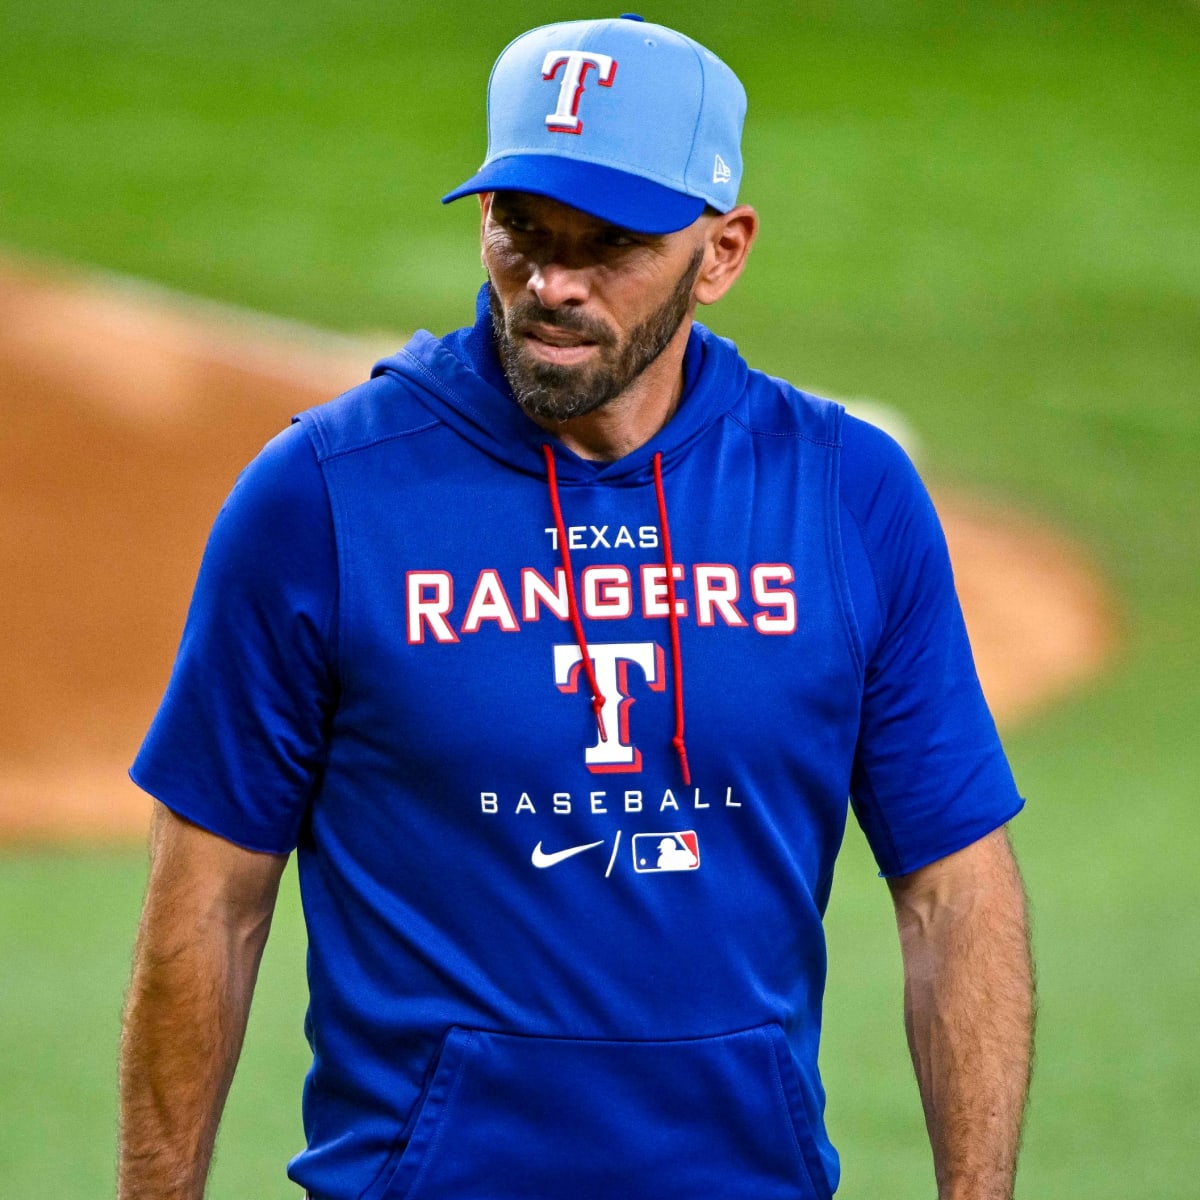 Texas Rangers fire manager Chris Woodward for team's